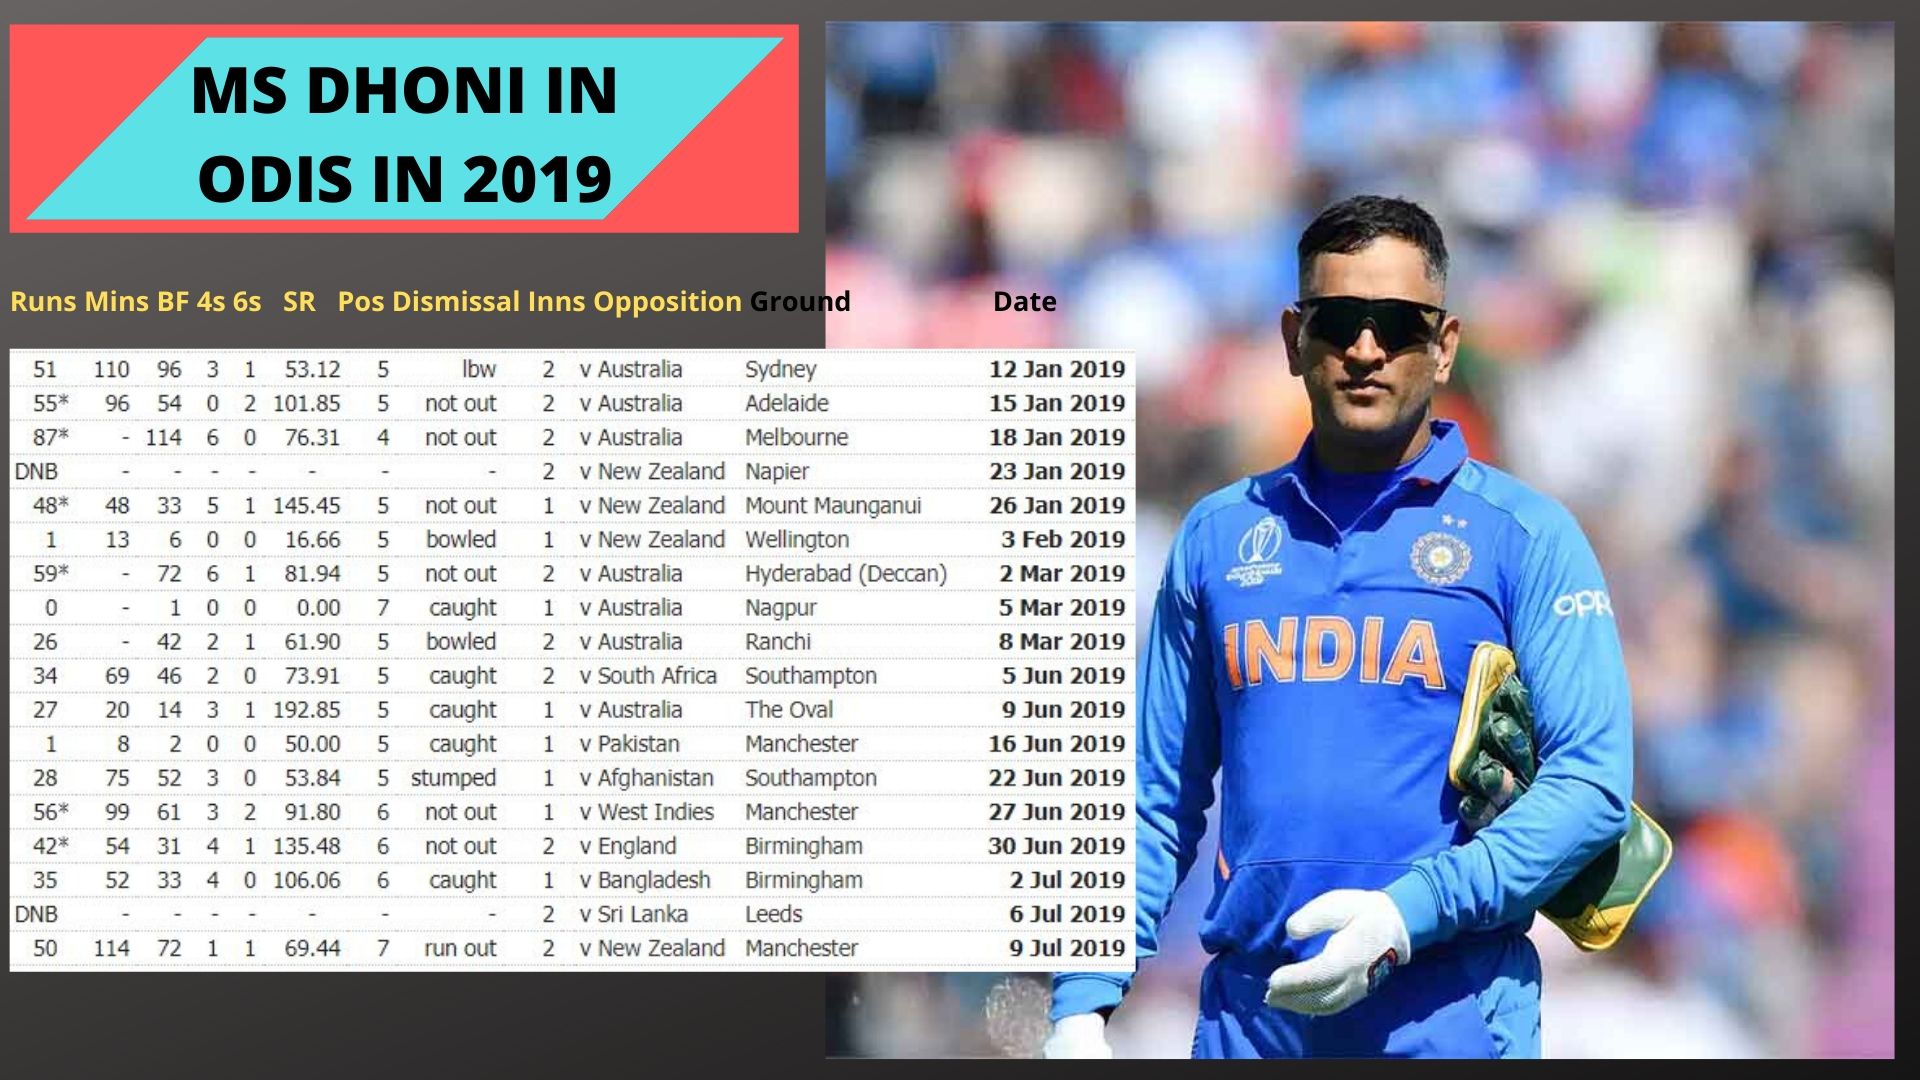 MS Dhoni's batting performance in 2019